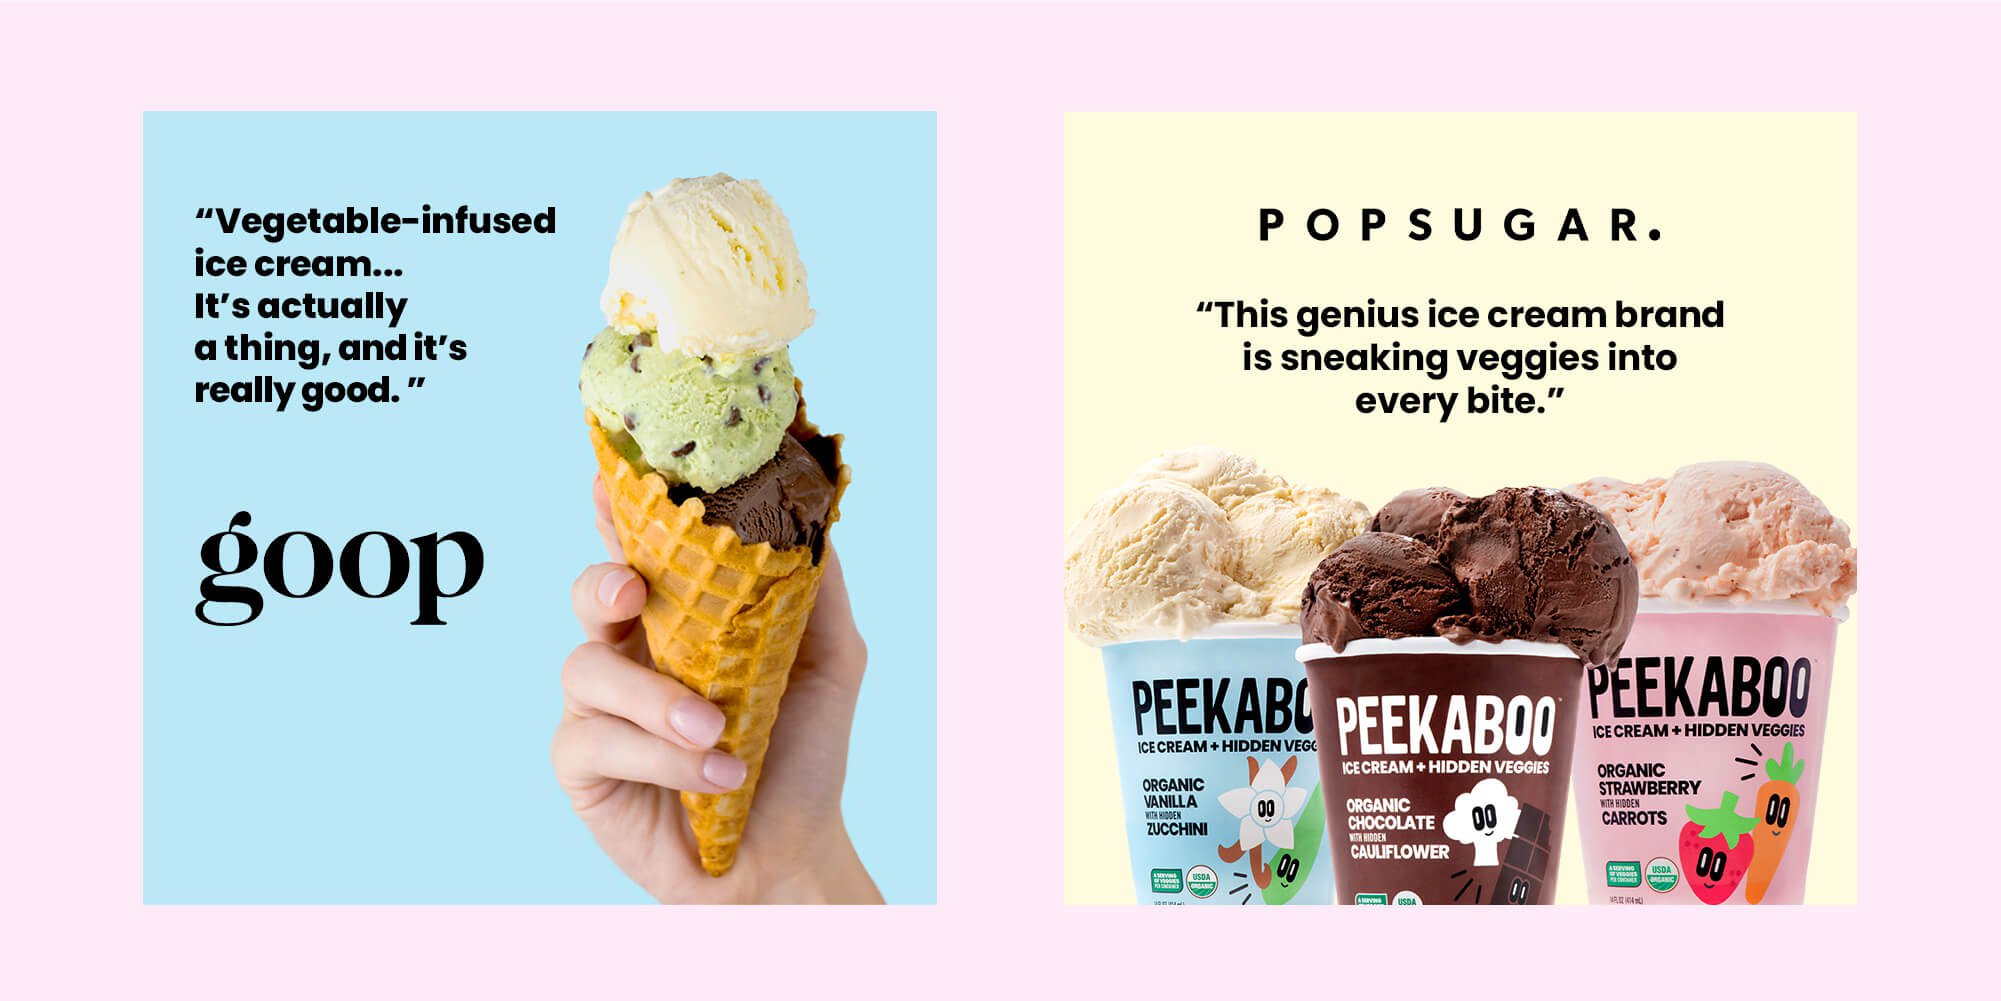 Jacober rebranding of Peekaboo Ice Cream. Photo of press reviews from Goop: "Vegetable infused ice cream, it's actually a thing and it's really good" and Popsugar: "This genius ice cream brand is sneaking veggies into every bite."